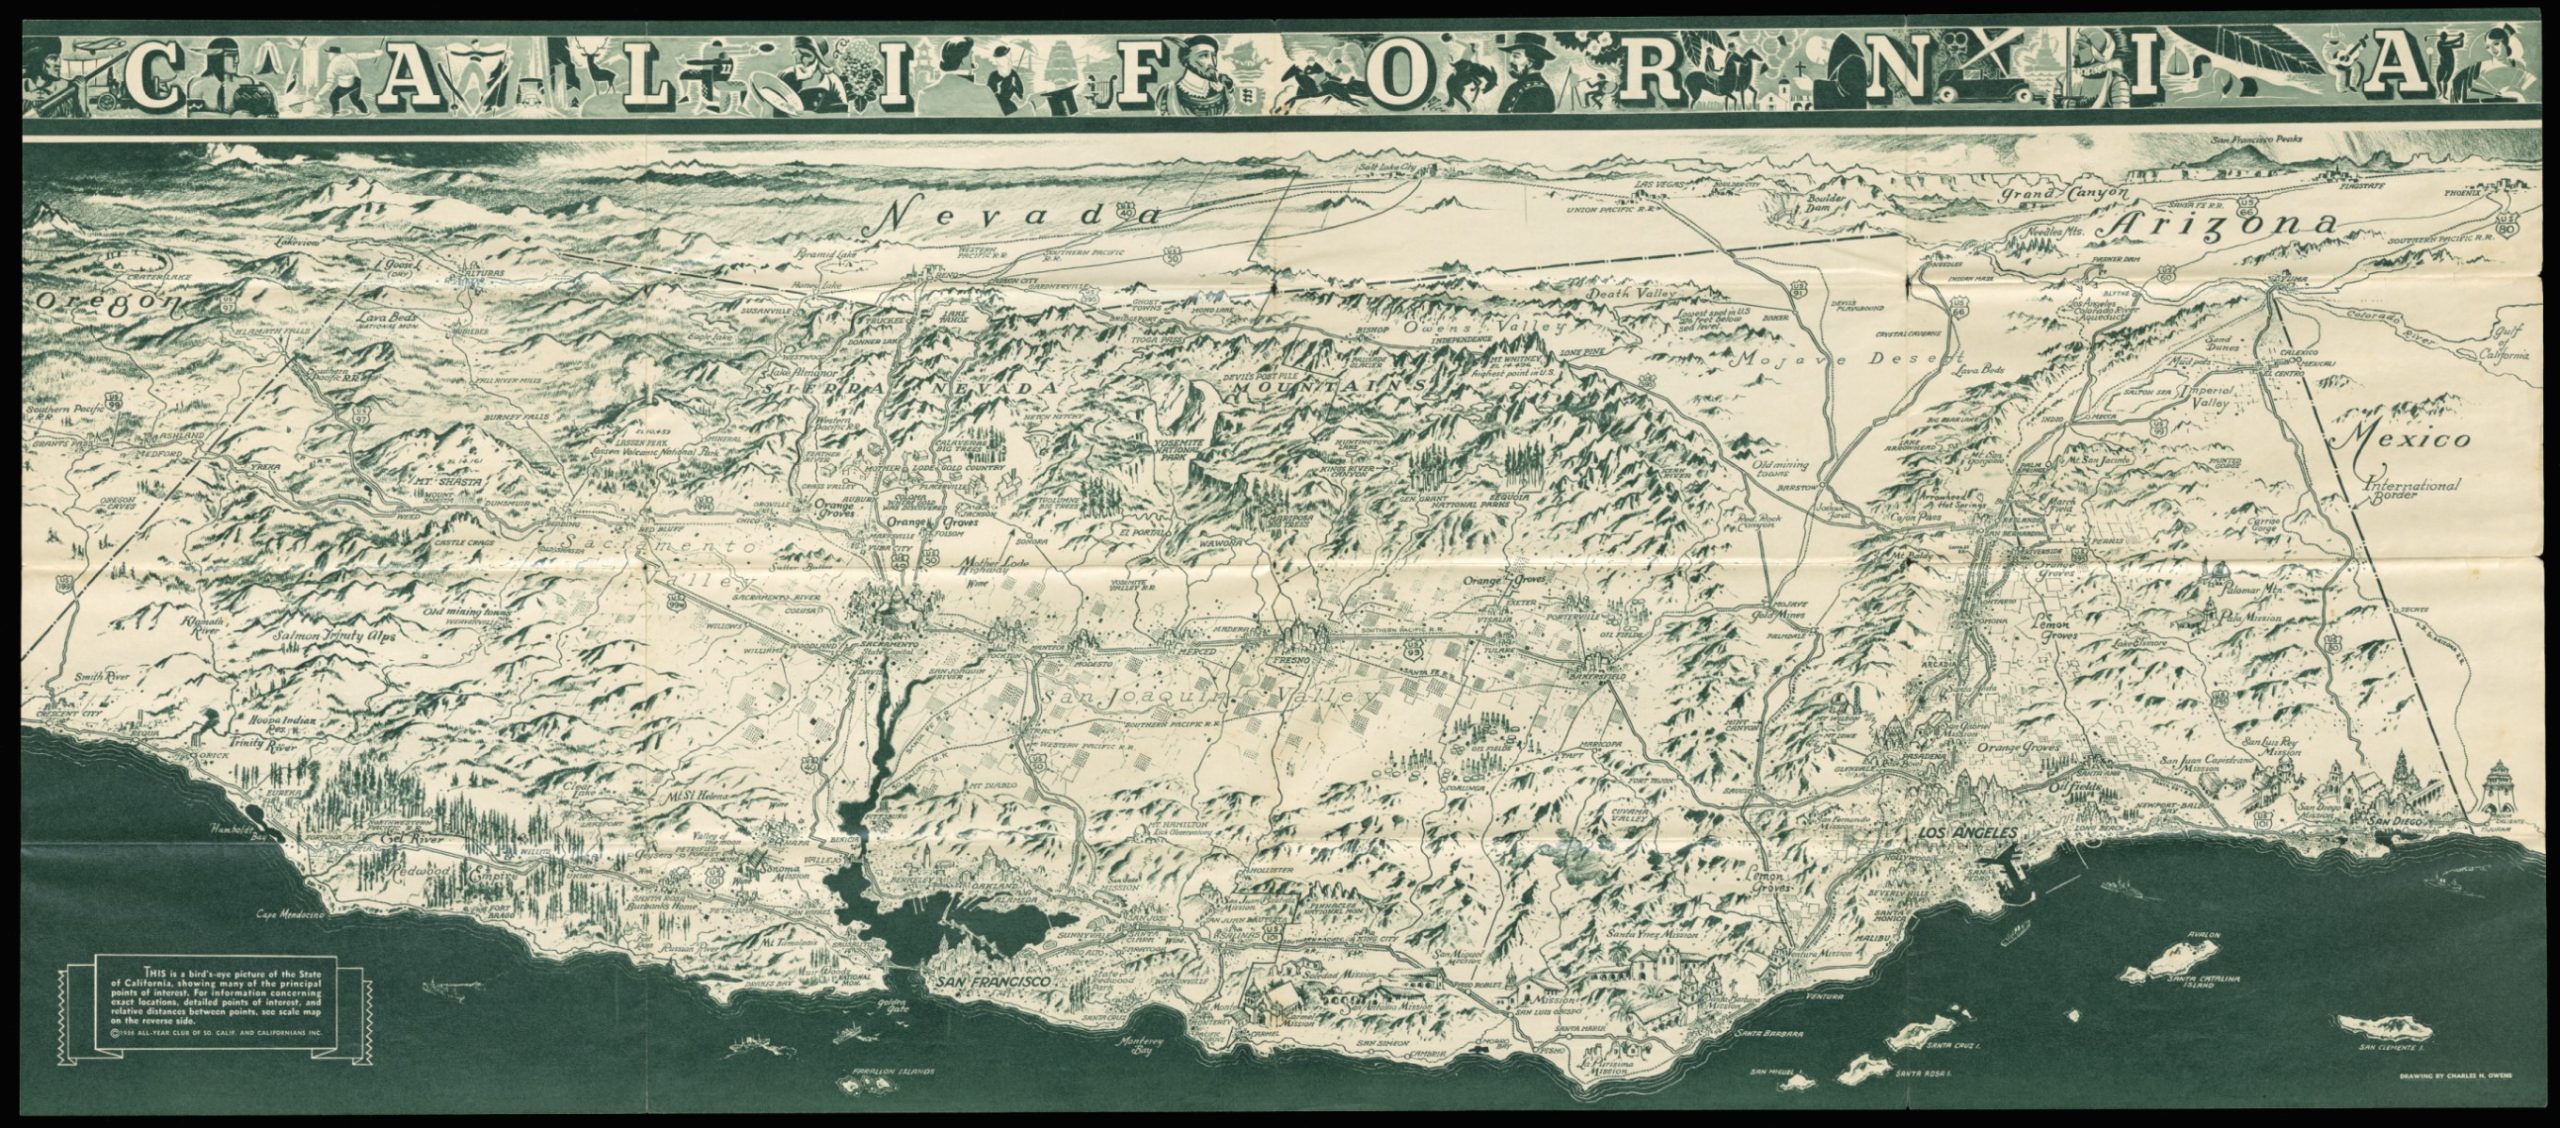 Illustrated map of California looking from the coast inland. Mountains, trees, and buildings are depicted in three dimensions.